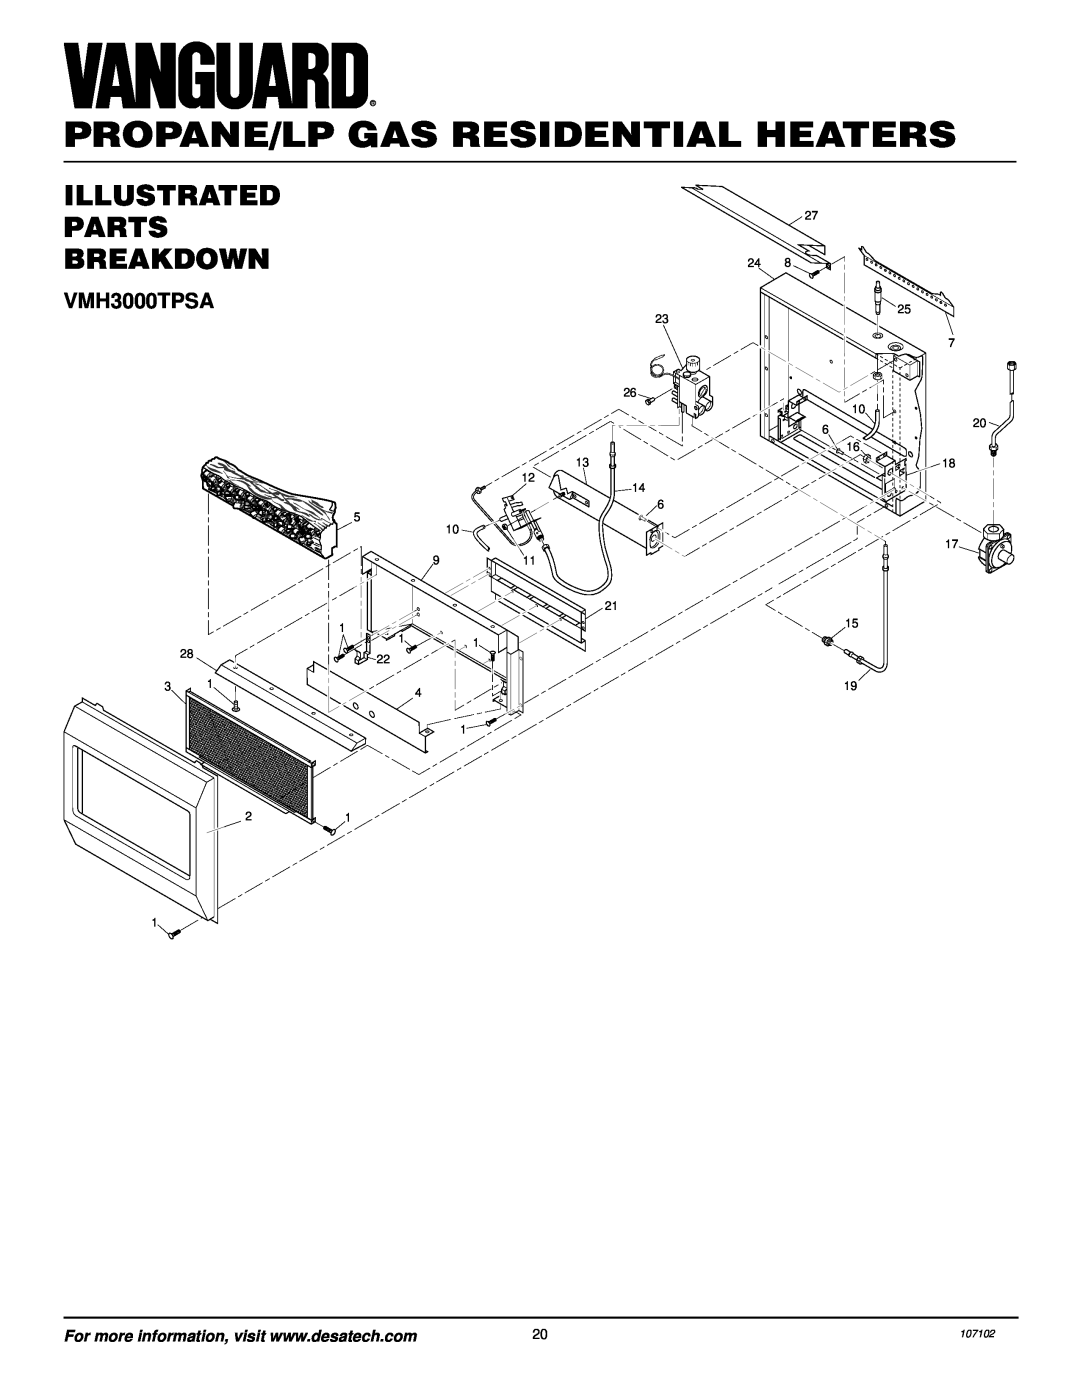 Vanguard Heating VMH3000TPSA installation manual Illustrated Parts Breakdown, Propane/Lp Gas Residential Heaters 